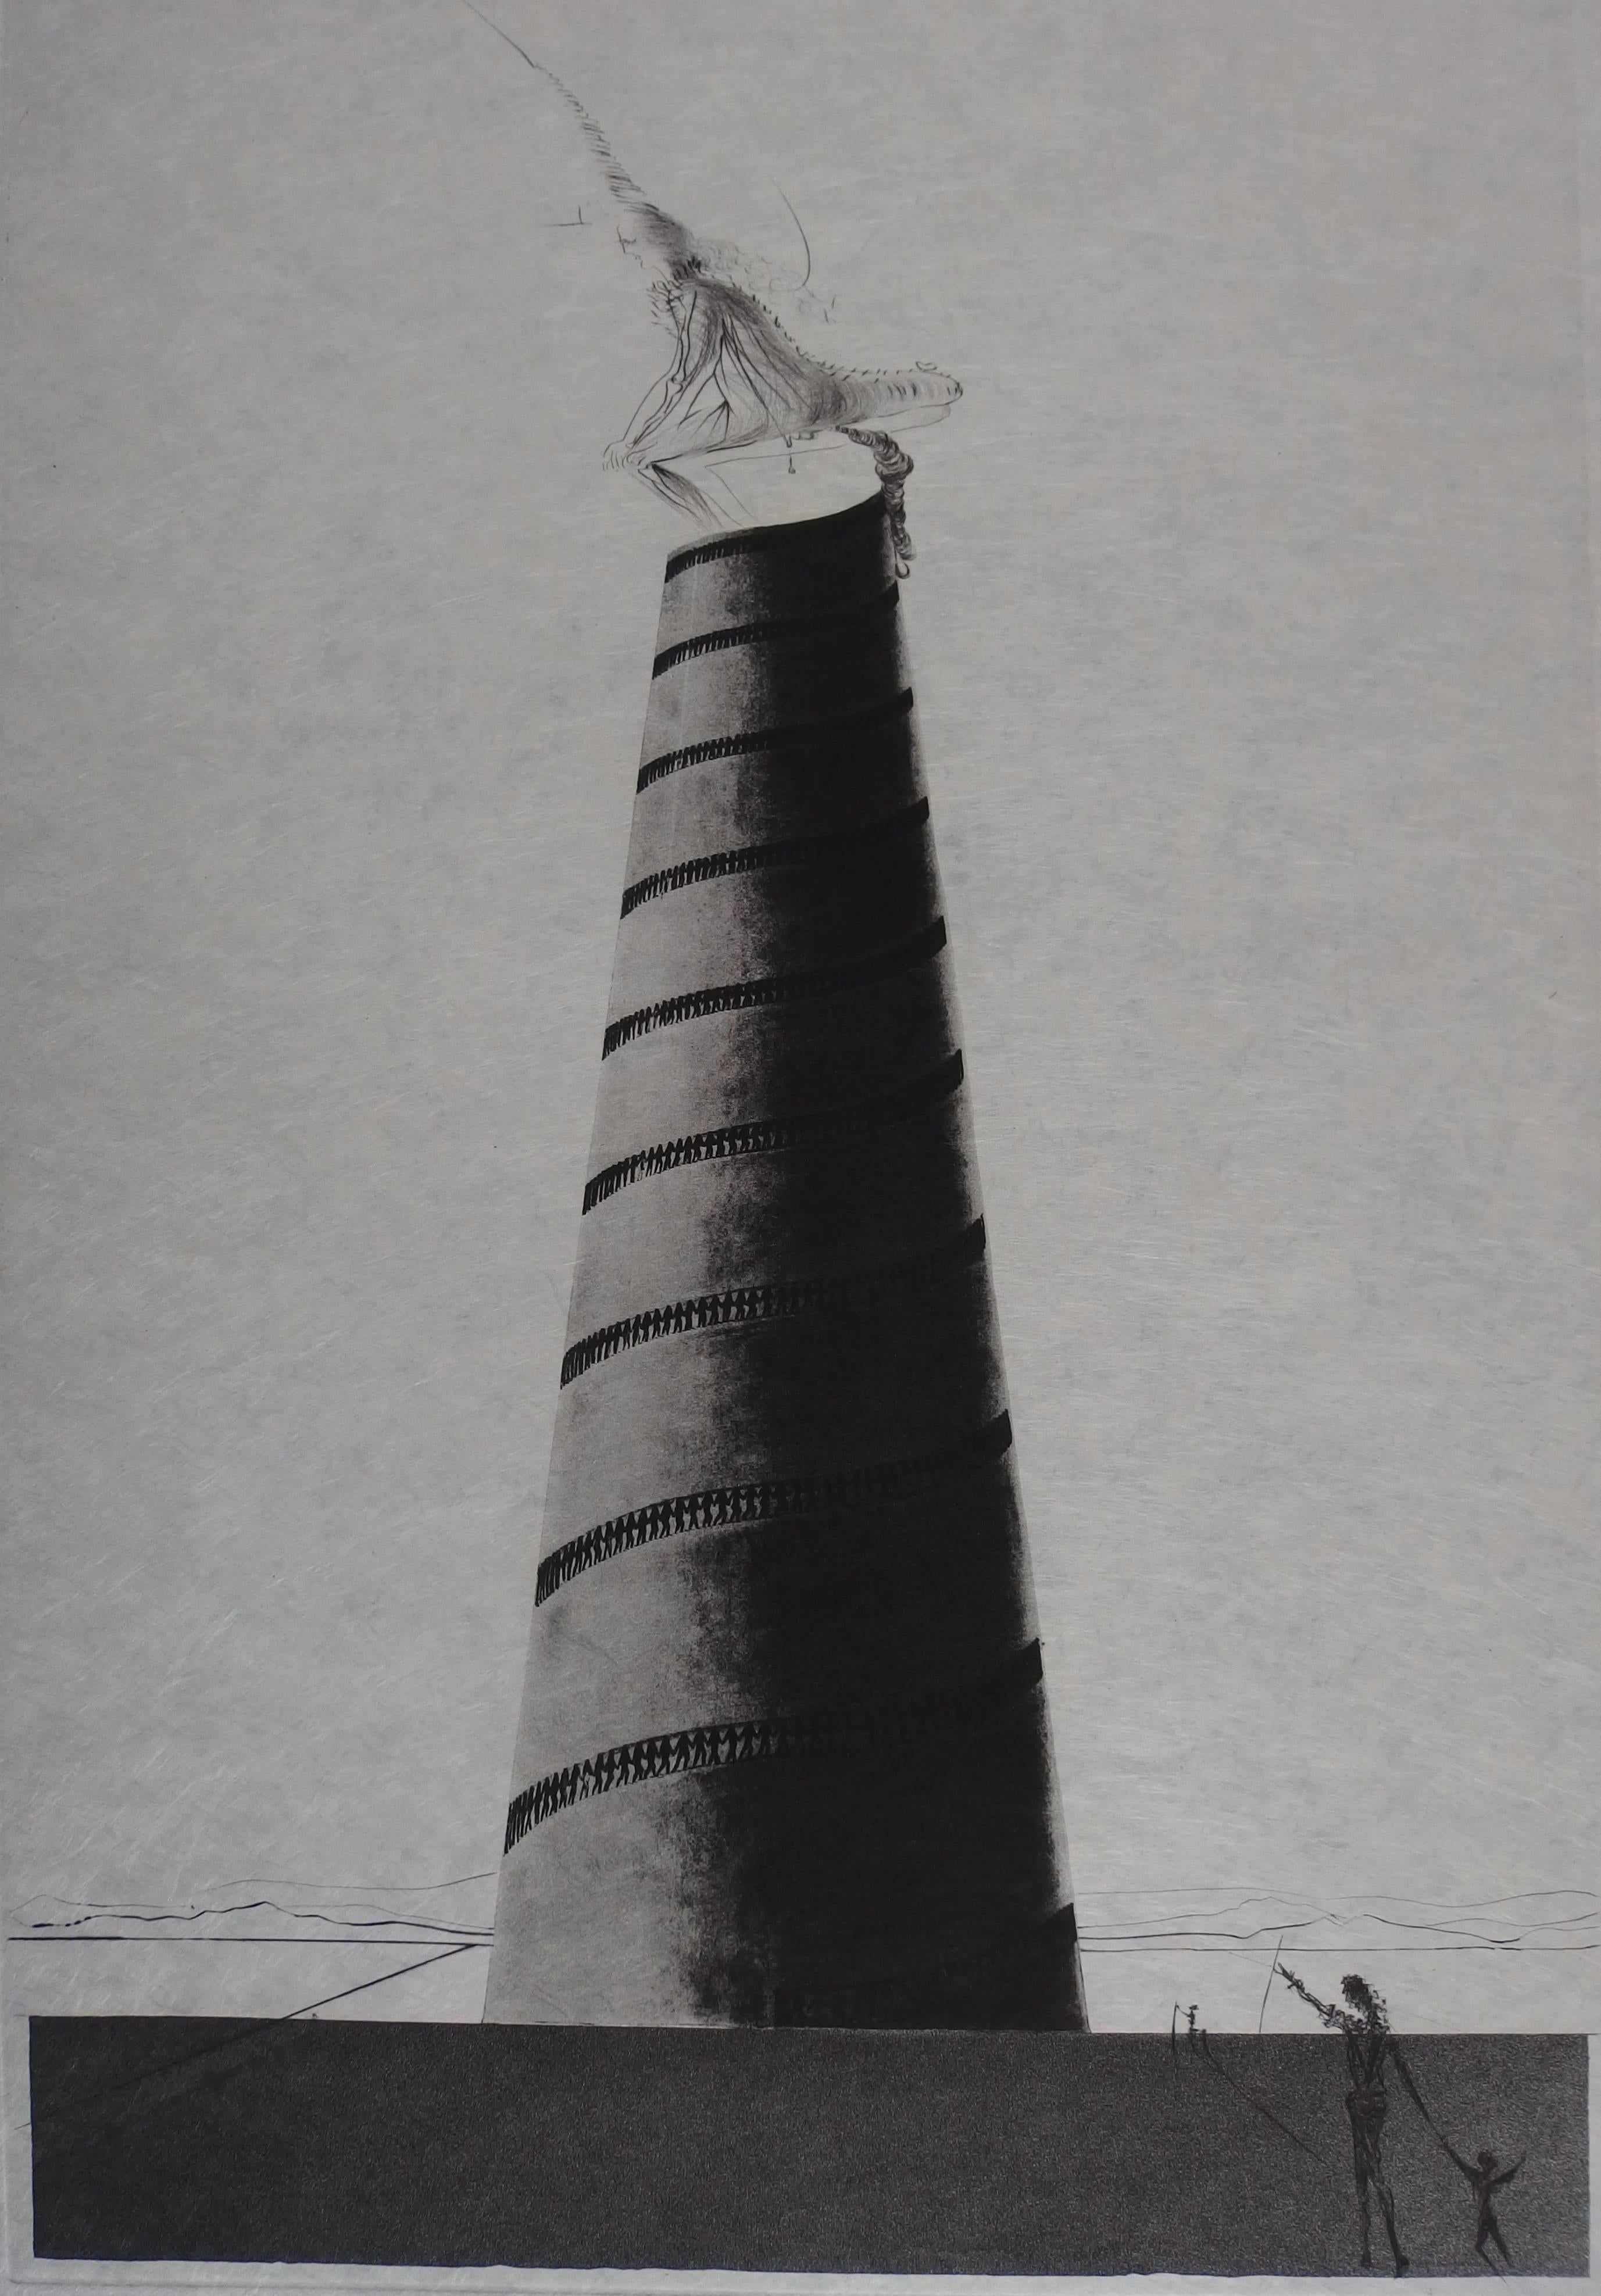 Ten Recipes of Immortality : Zootrope and Boullée Tower - Signed etching - Surrealist Print by Salvador Dalí